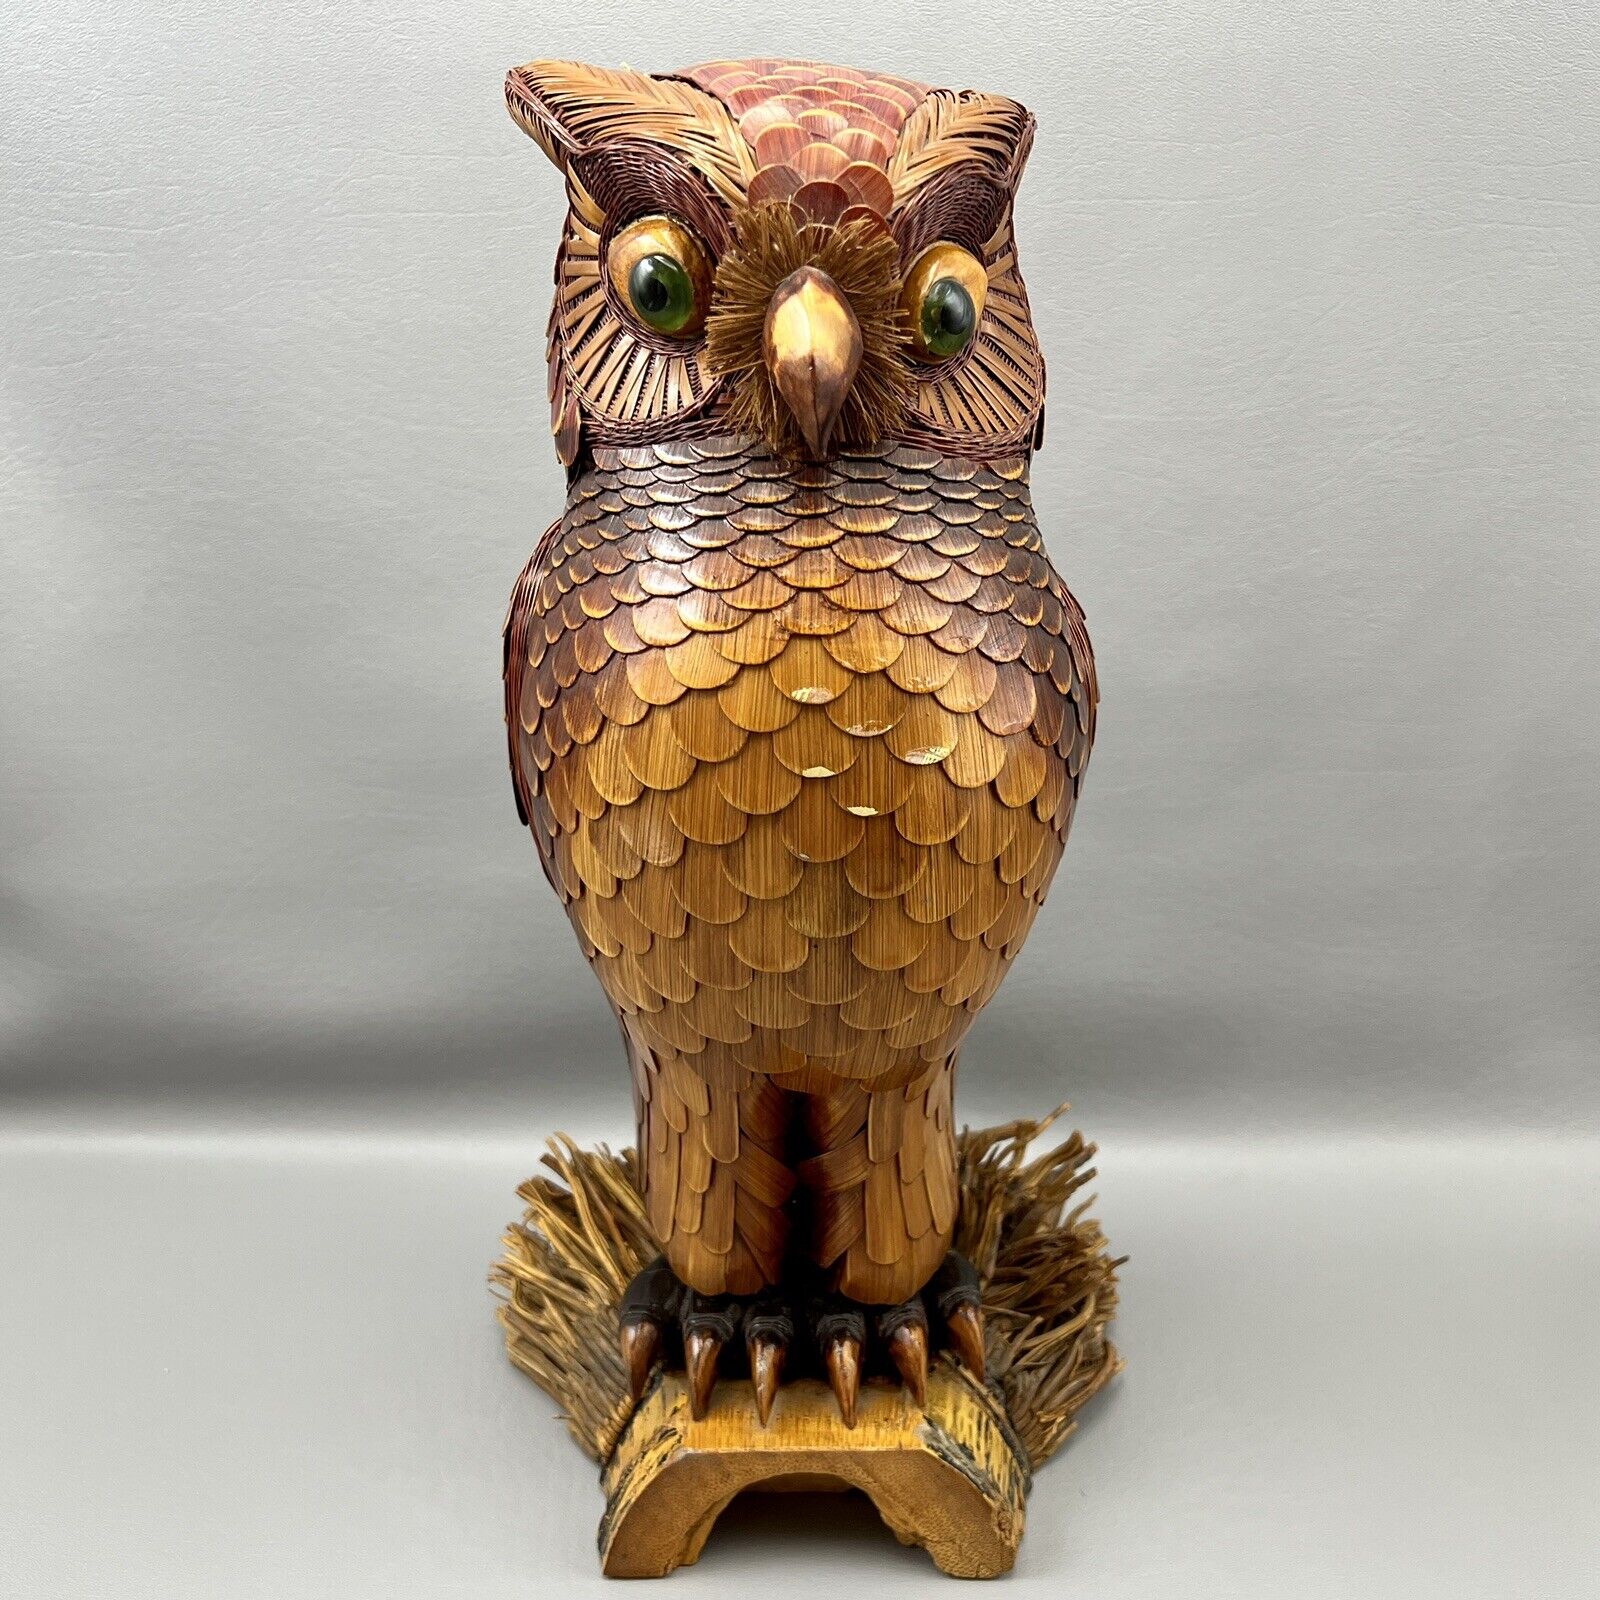 Vintage Mid Century Large Chinese Owl By Shanghai Handicrafts From The People's